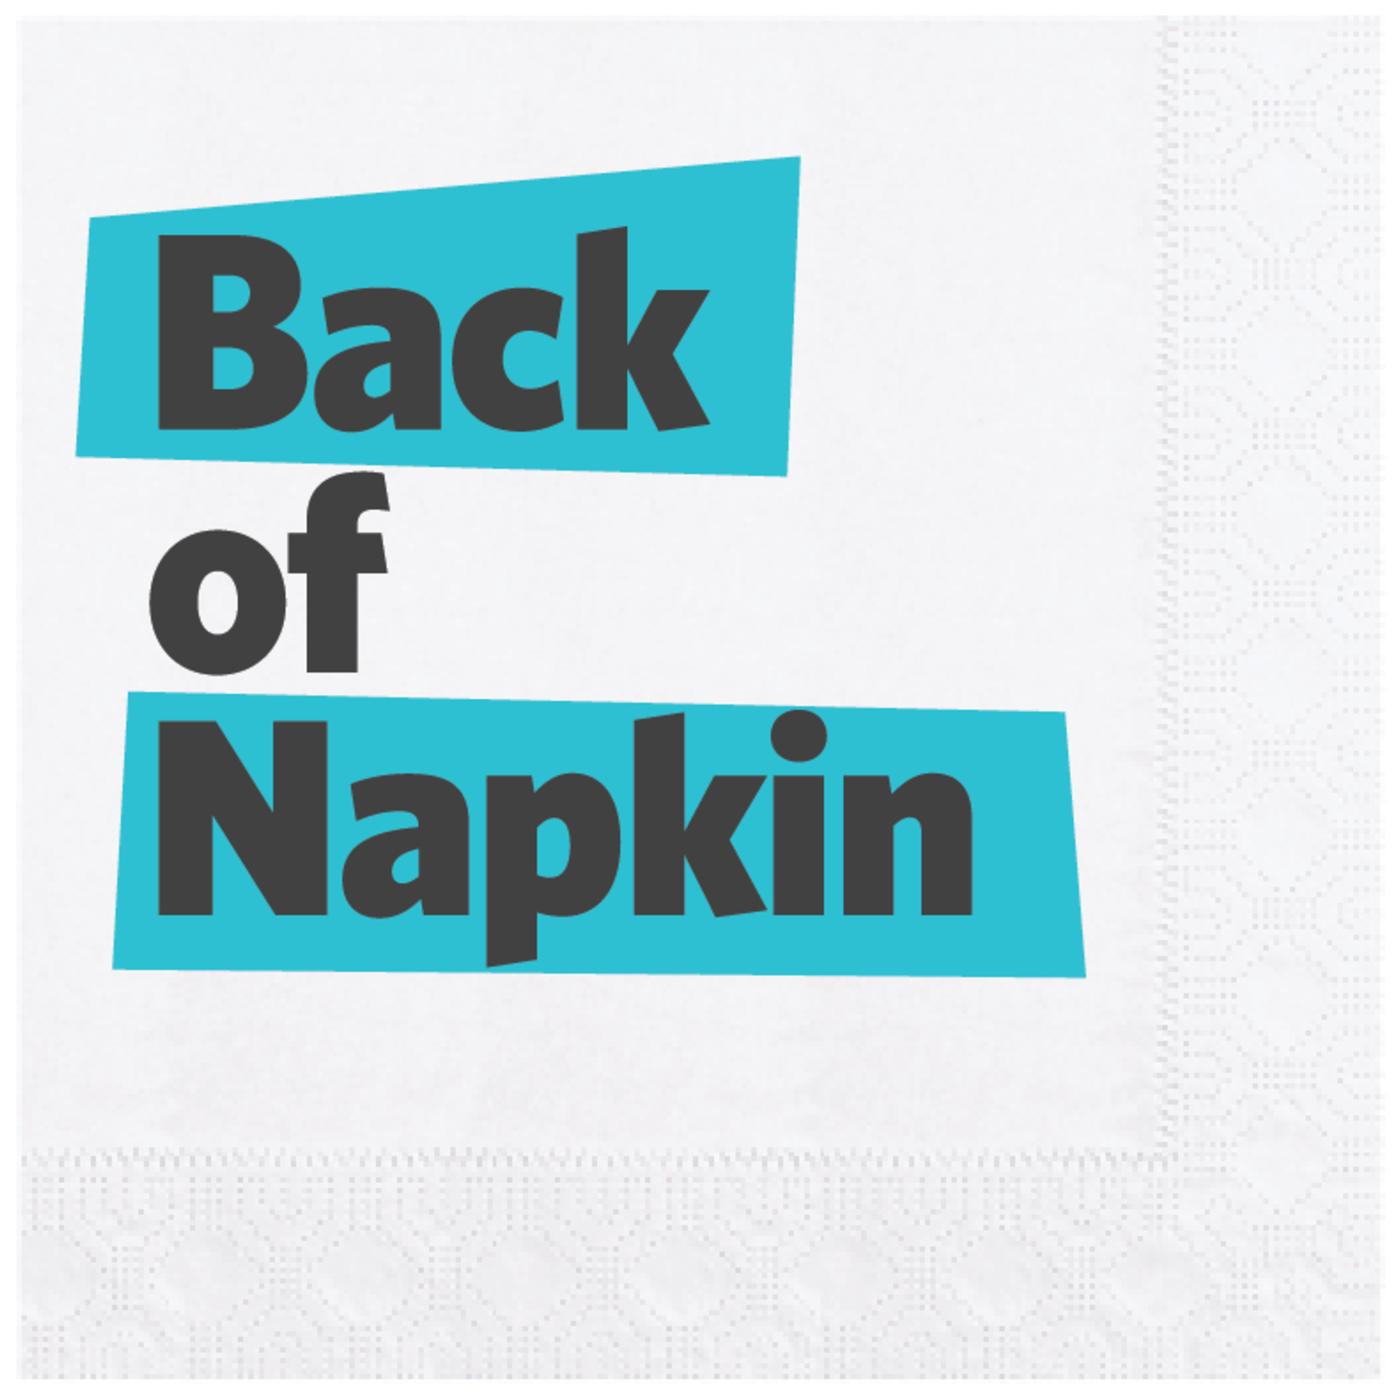 back-of-napkin-cmo-hot-topics-discussed